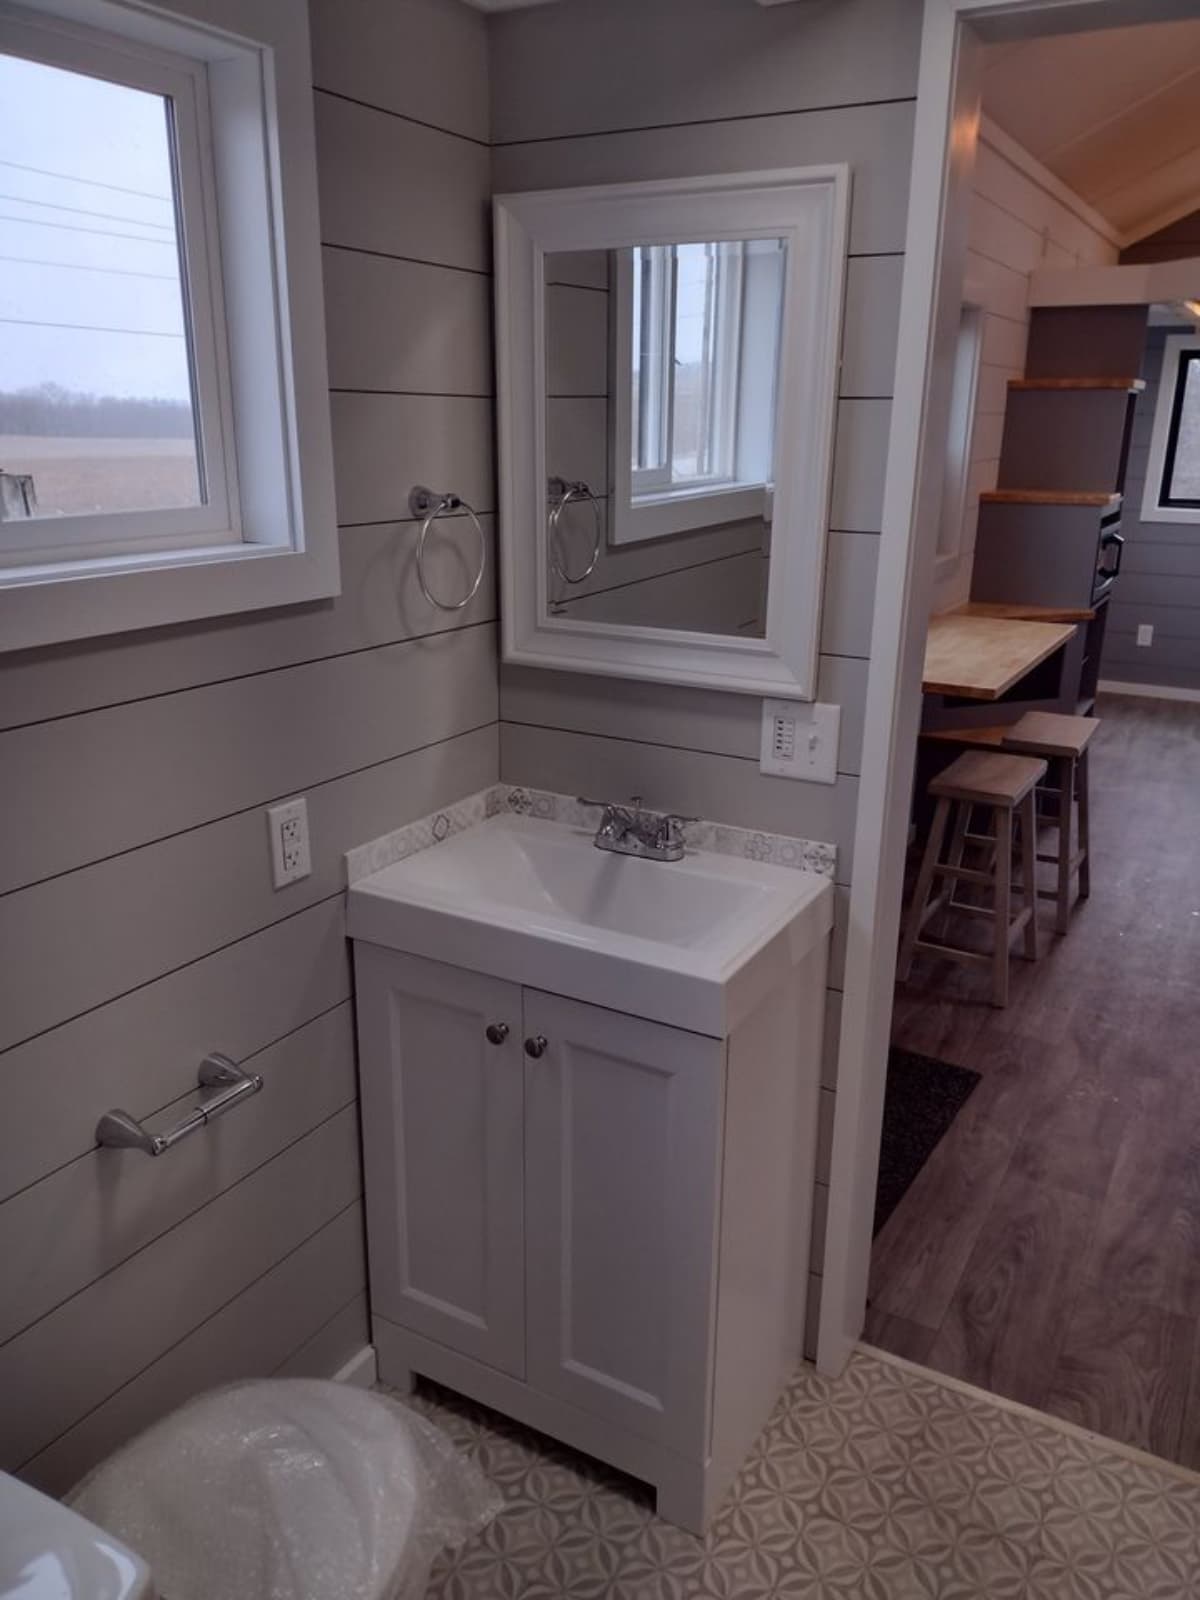 Sink with vanity and mirror